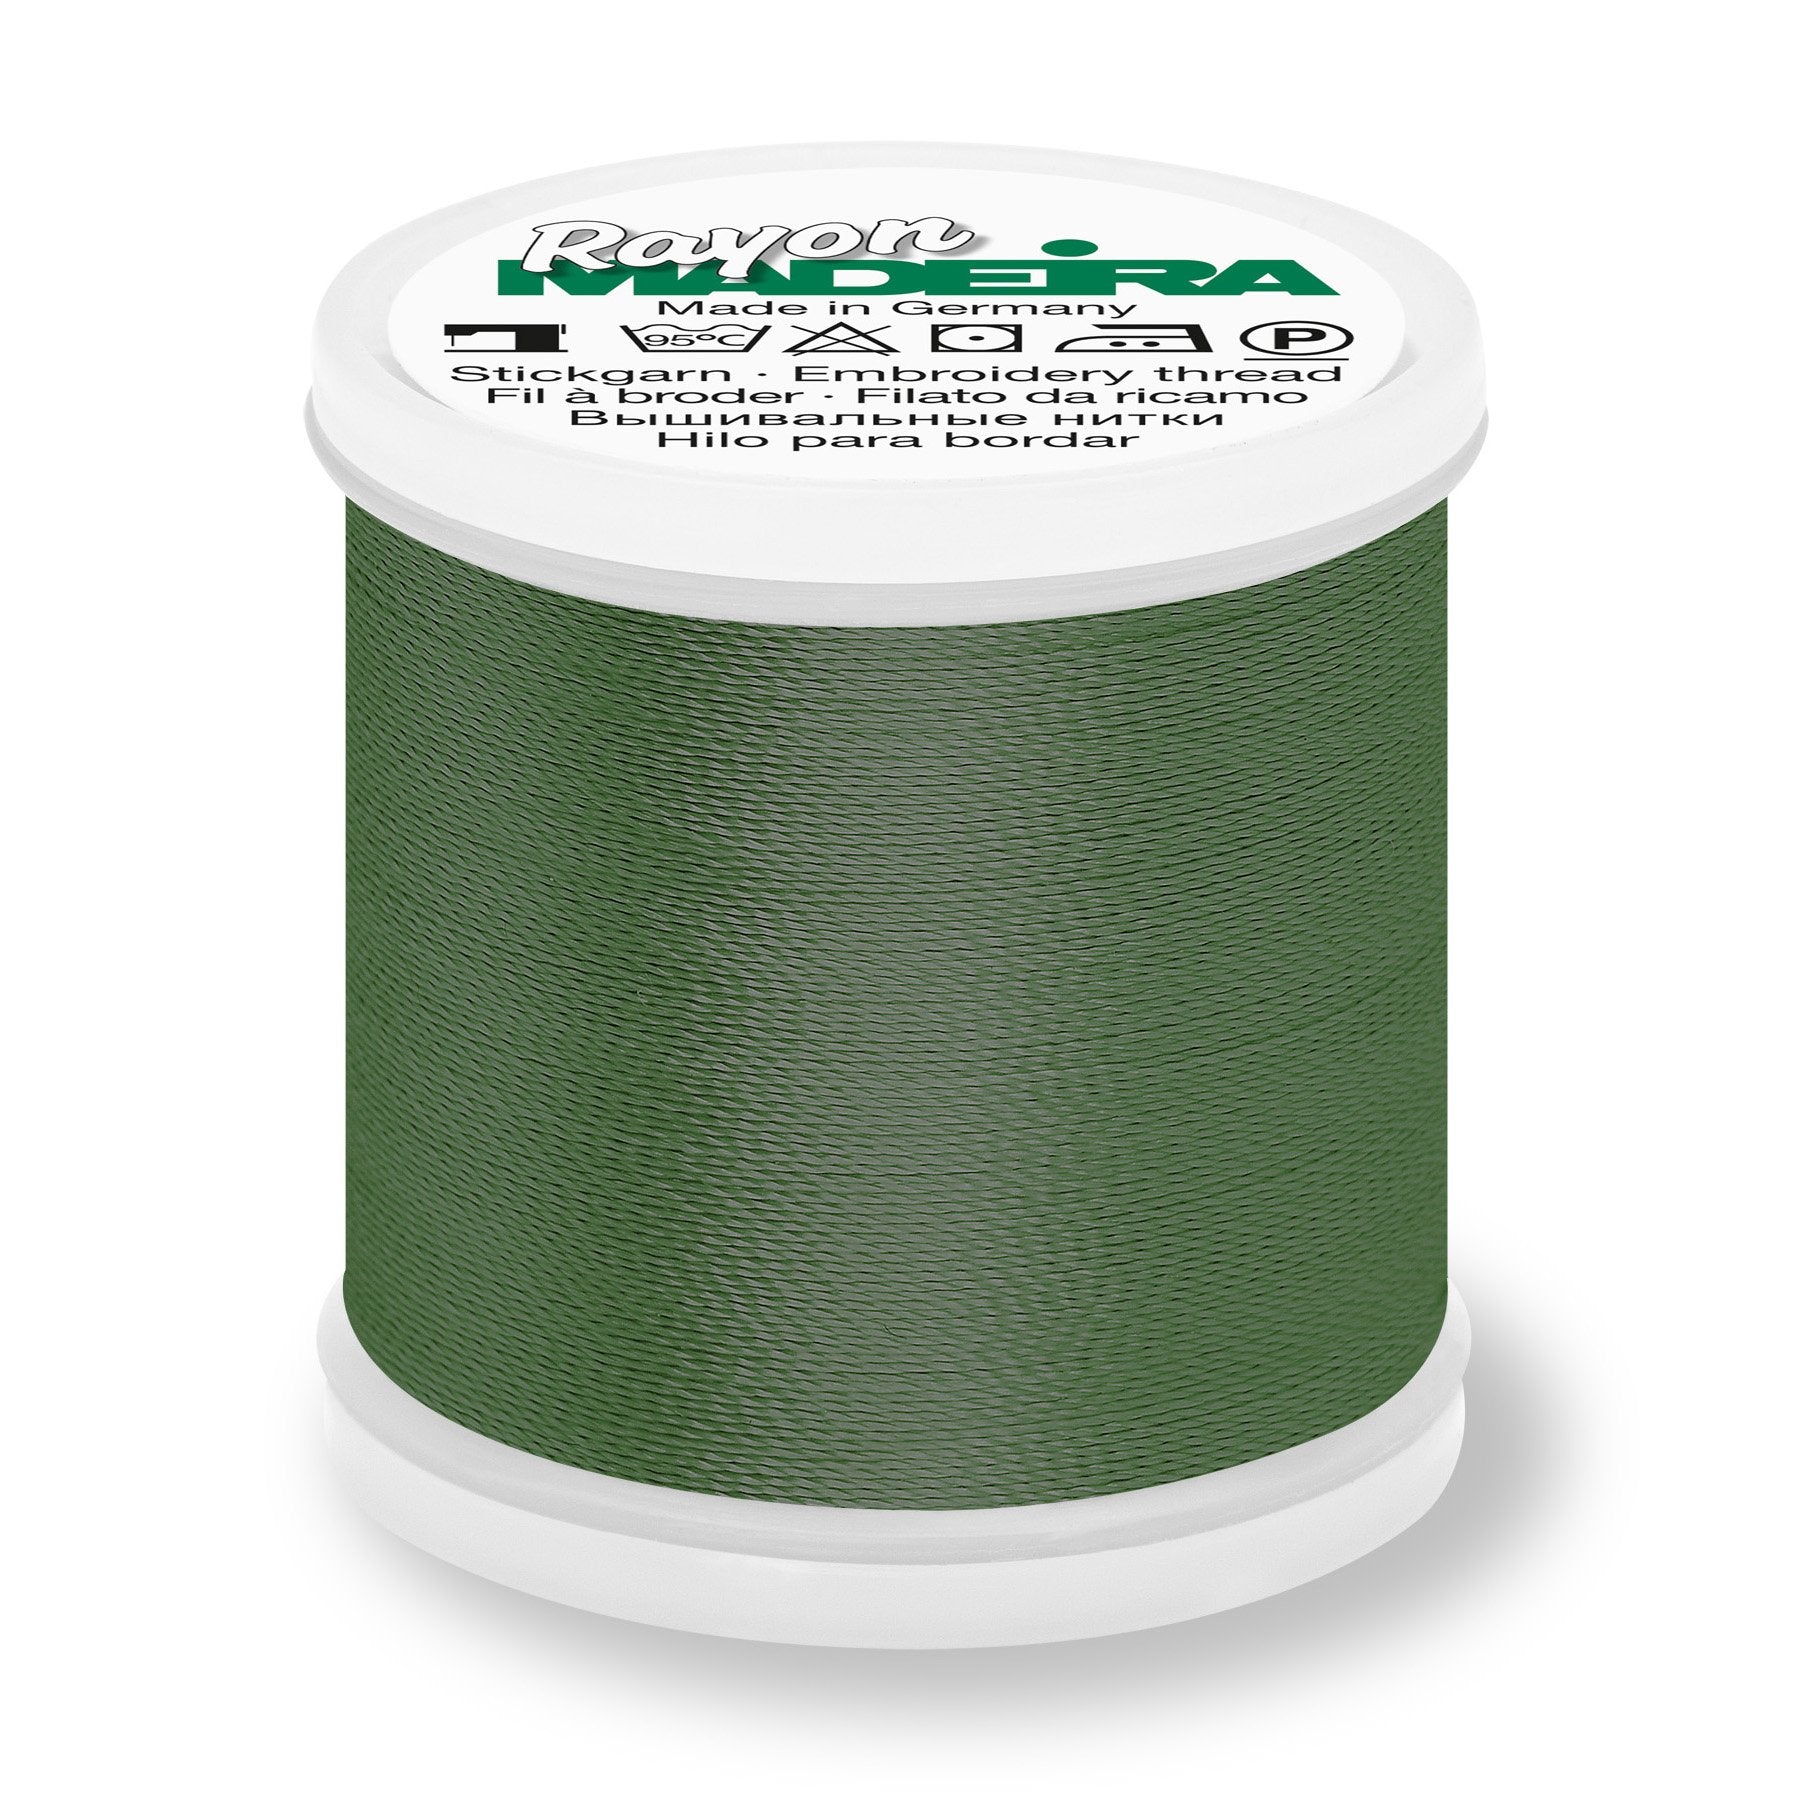 Madeira Rayon 40 Embroidery Thread 200m #1357 Dark Army Green from Jaycotts Sewing Supplies